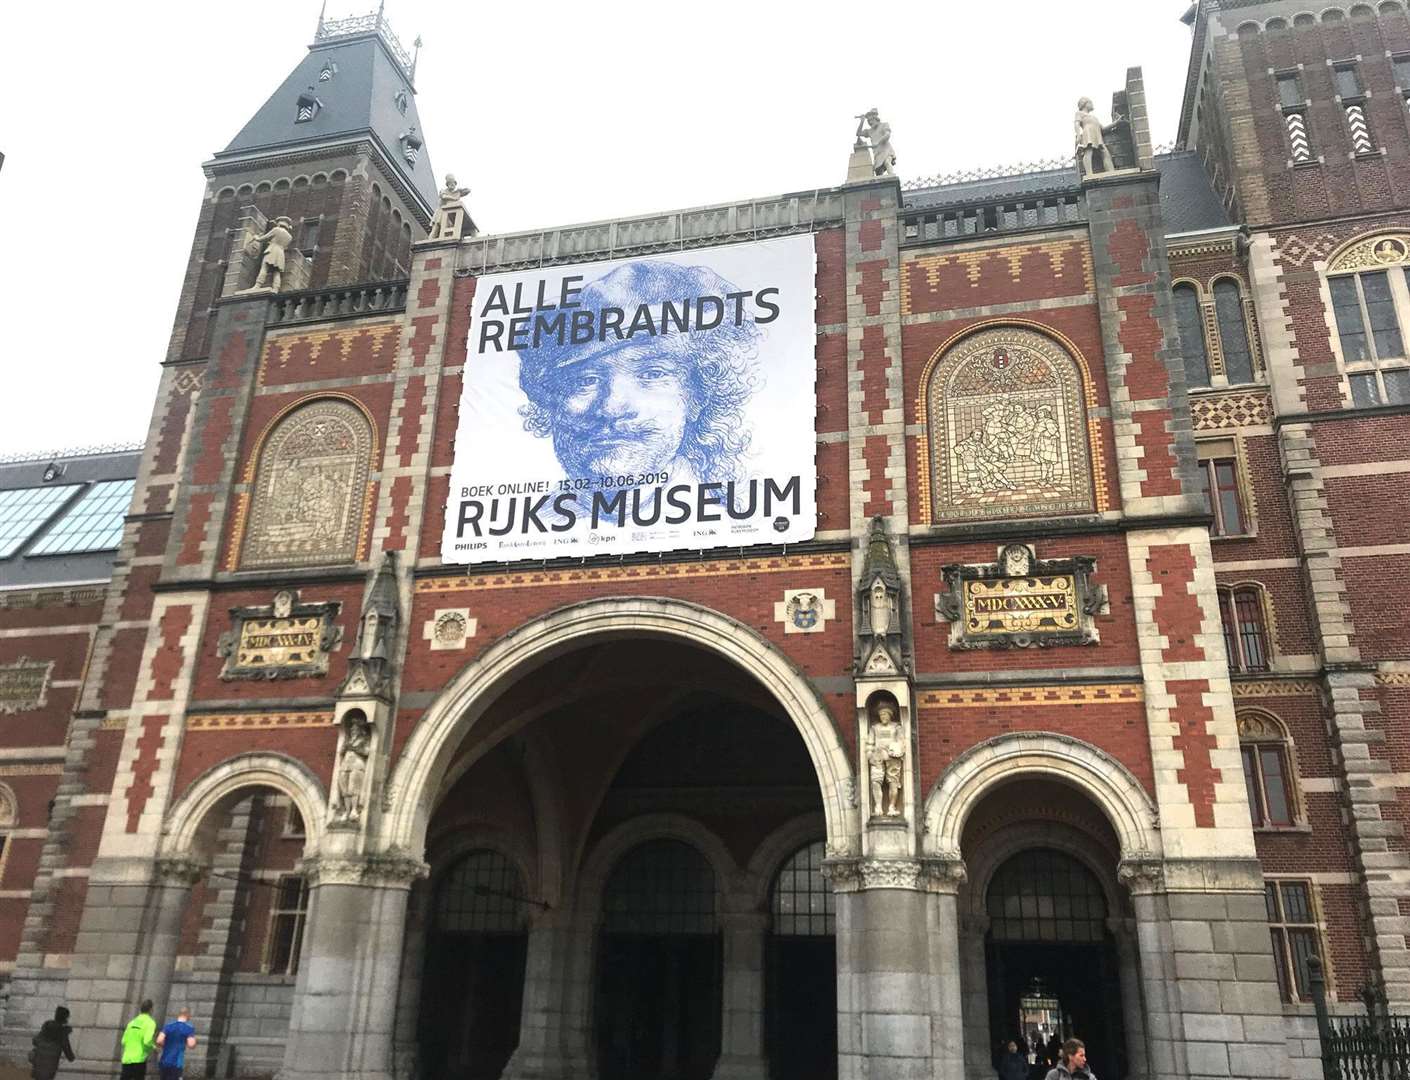 The Rijksmuseum, Amsterdam is holding the All The Rembrandts exhibition until June 10, 2019. Picture: Gabrielle Fagan/PA